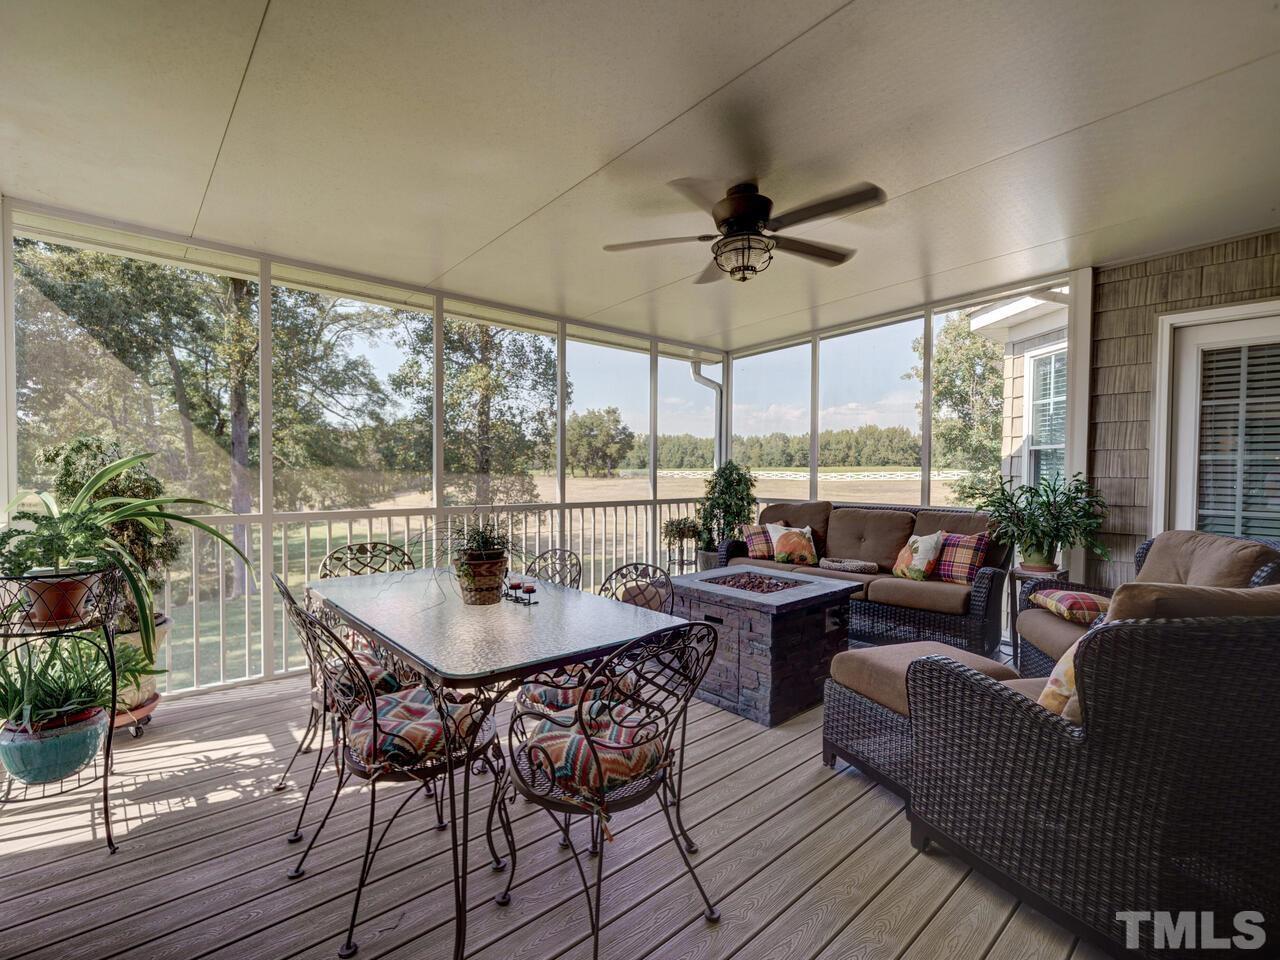 The Screened Porch is sure to be a favorite place to relax & enjoy Mother Nature